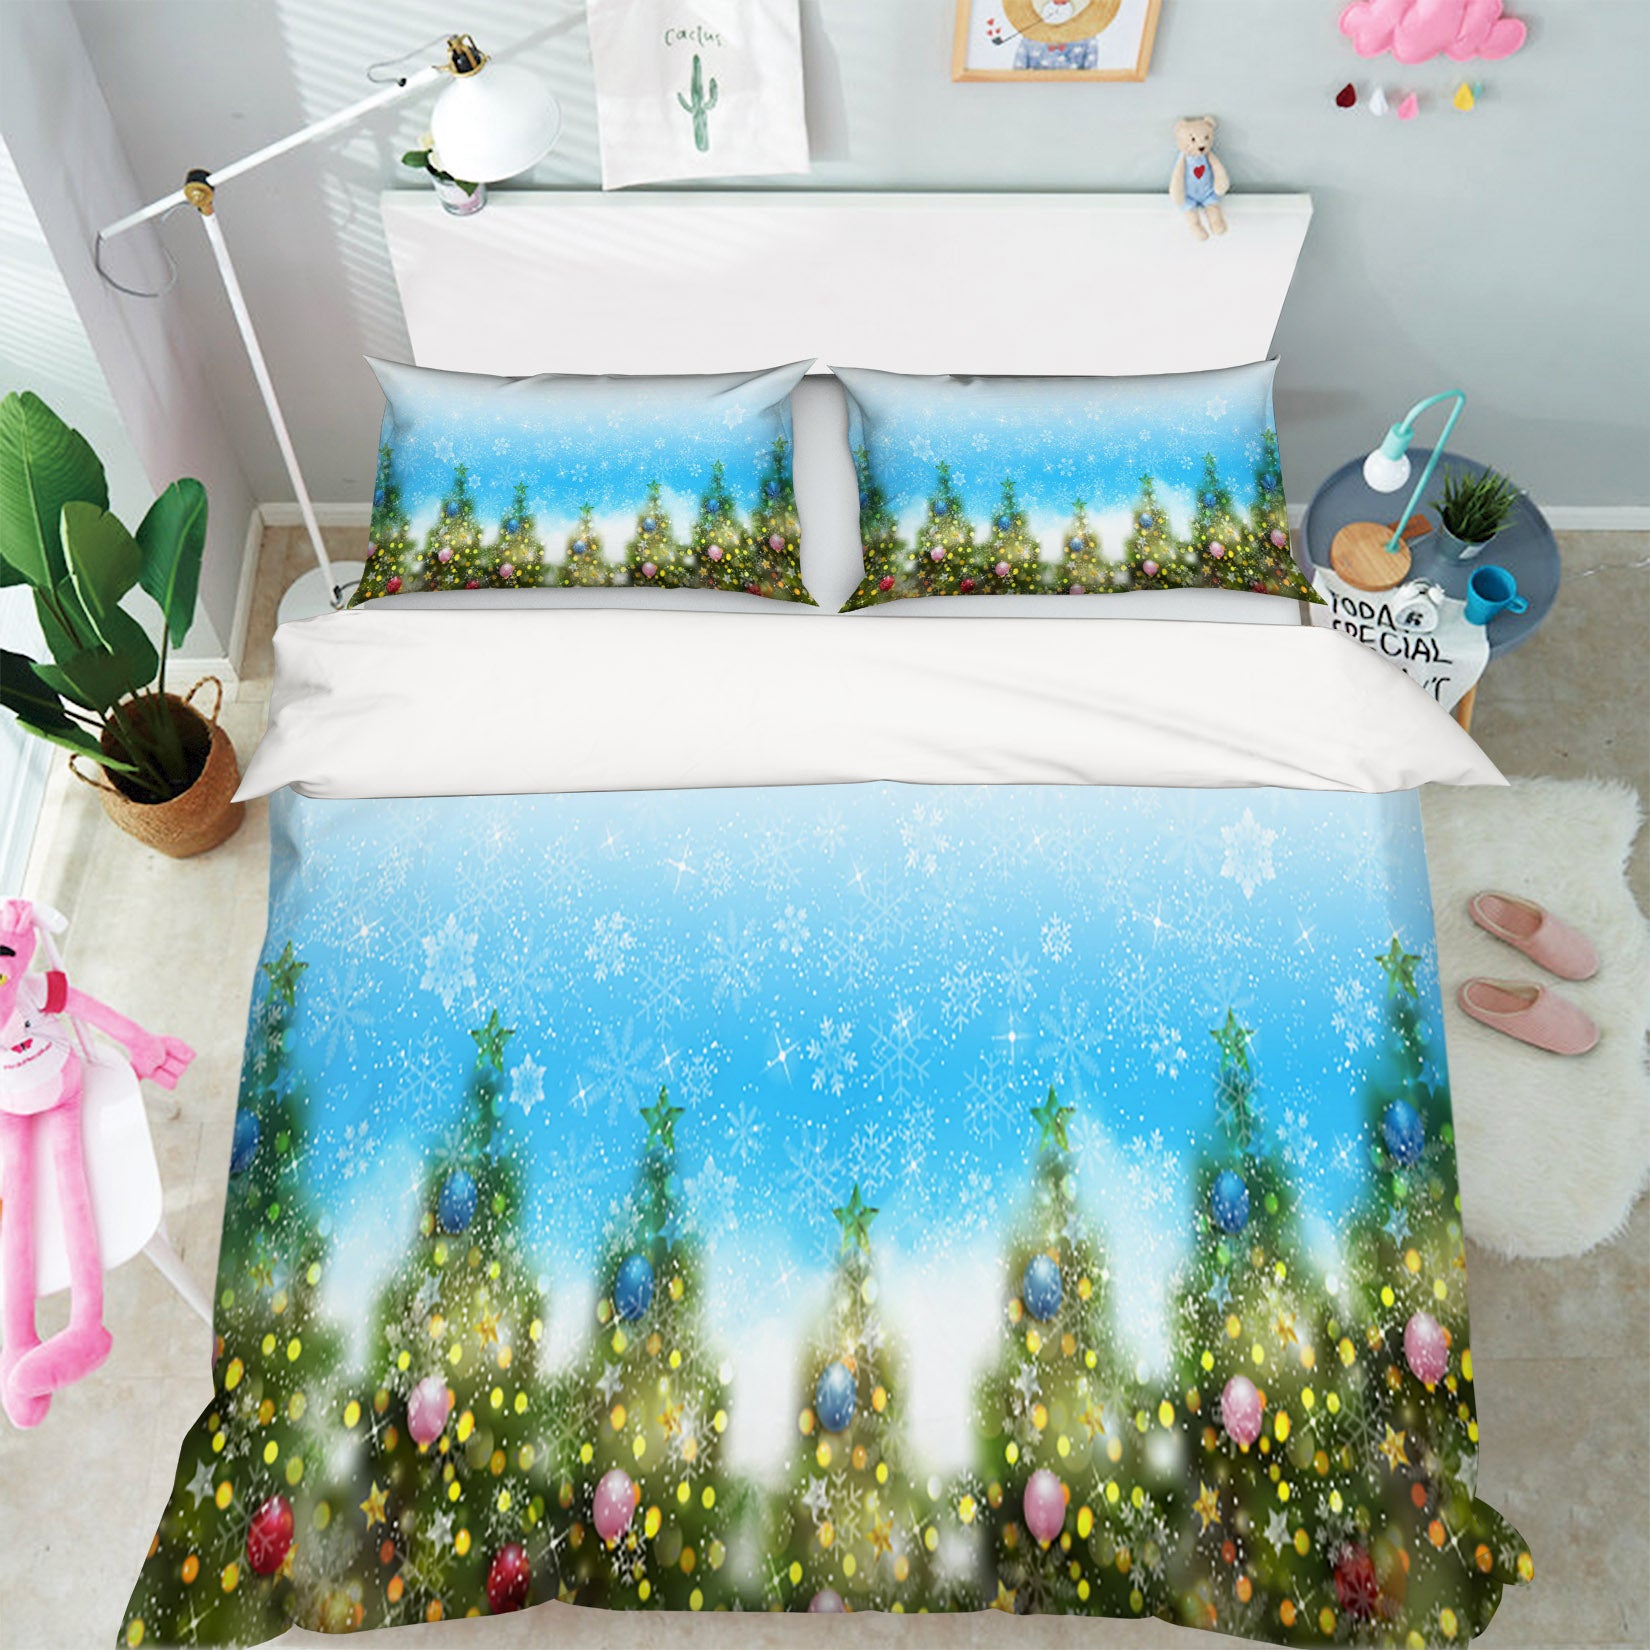 3D Tree Snowflake Colored Balls 53018 Christmas Quilt Duvet Cover Xmas Bed Pillowcases